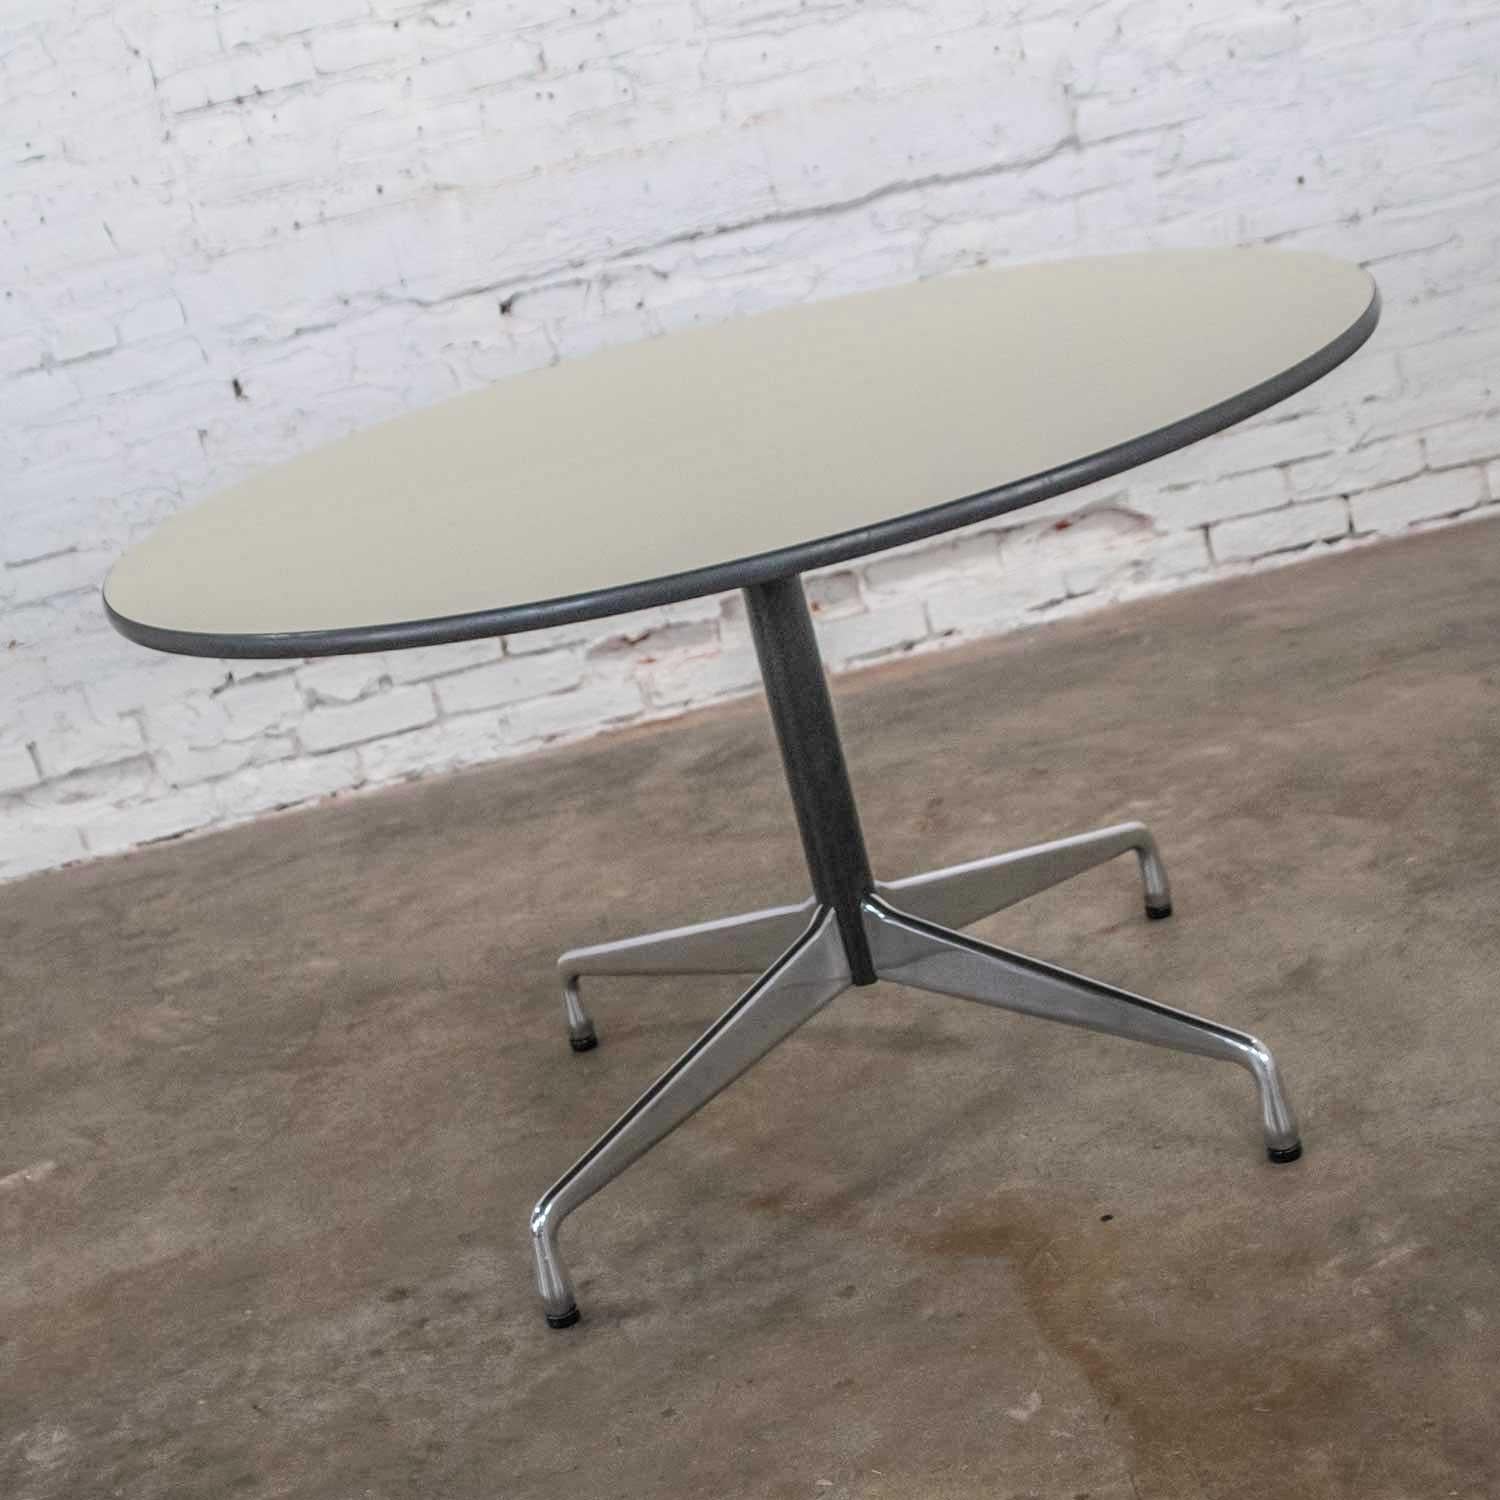 Eames Herman Miller Universal Base Round Table Off-White Laminate Top In Good Condition For Sale In Topeka, KS